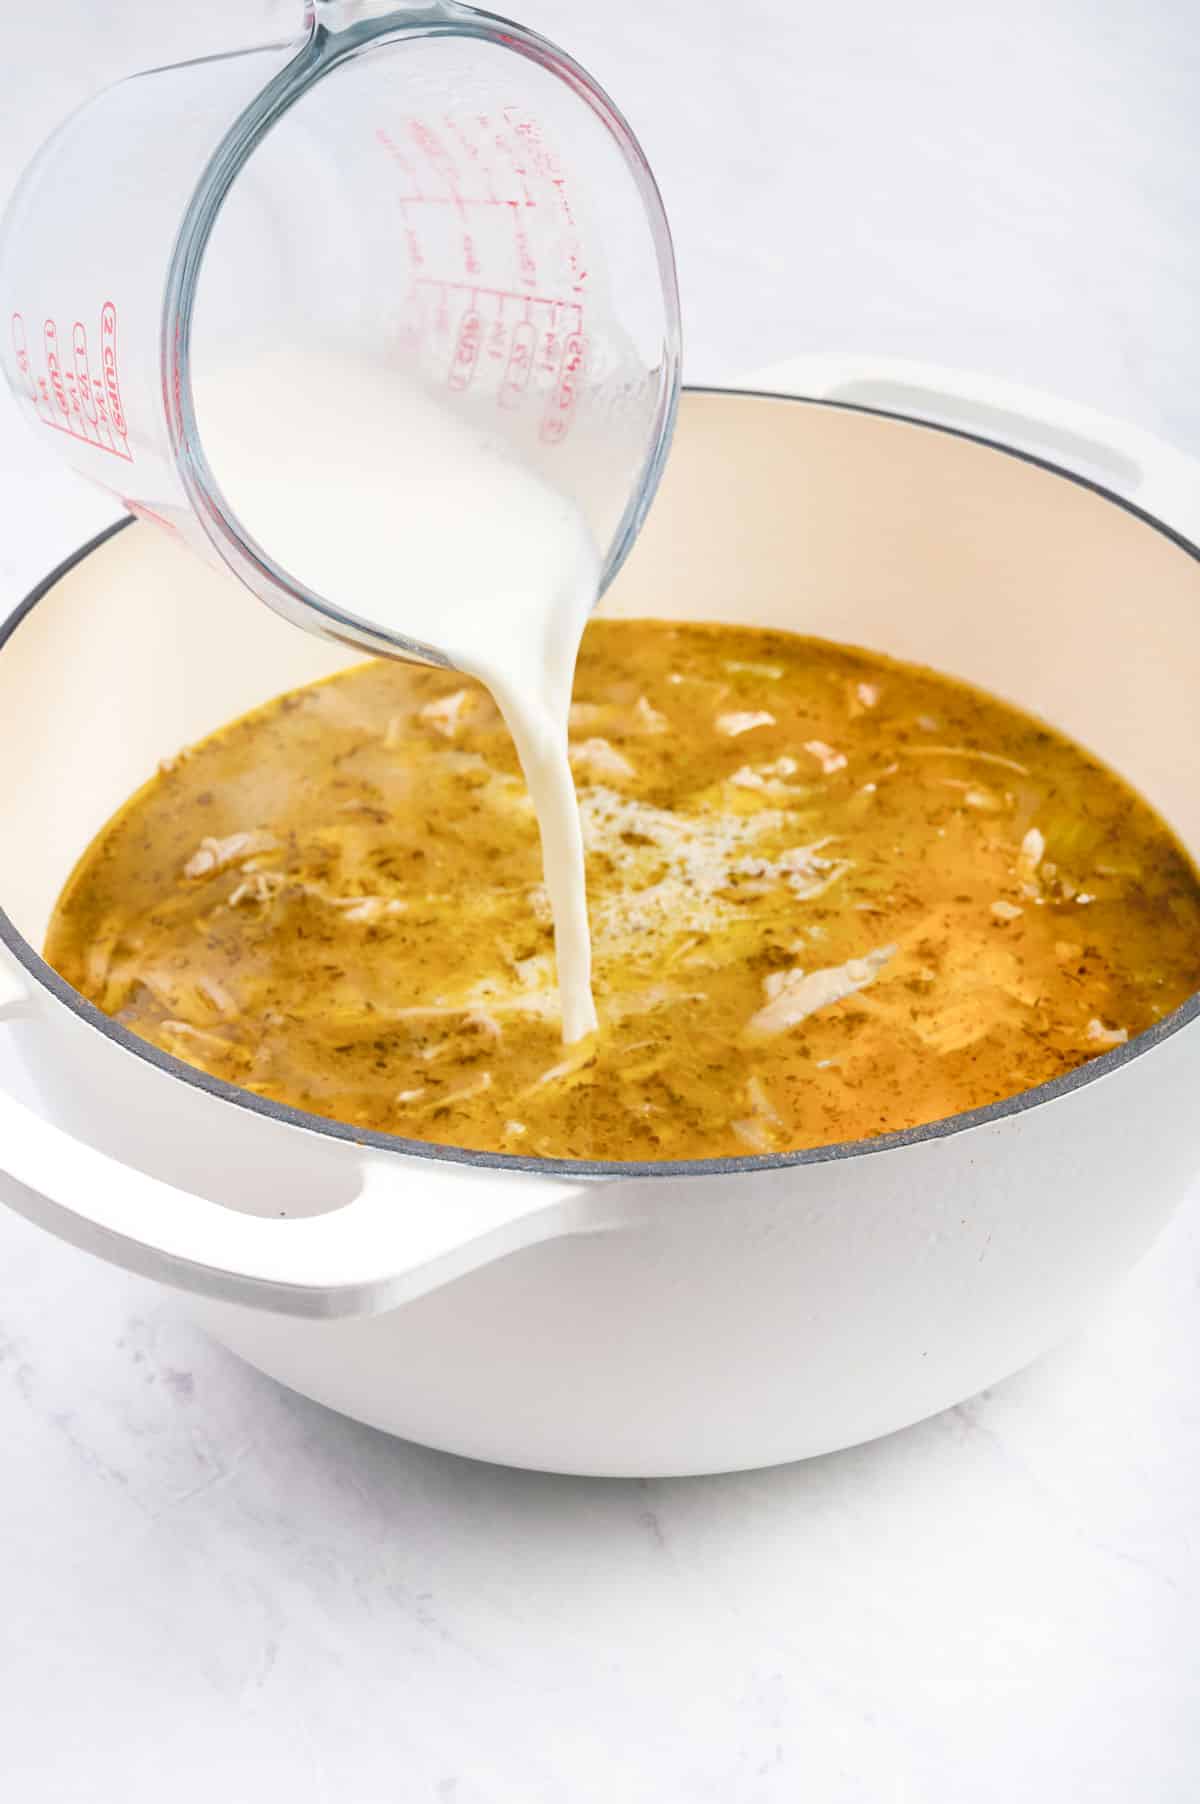 A starch slurry being poured into a pot full of gnocchi soup with chicken.